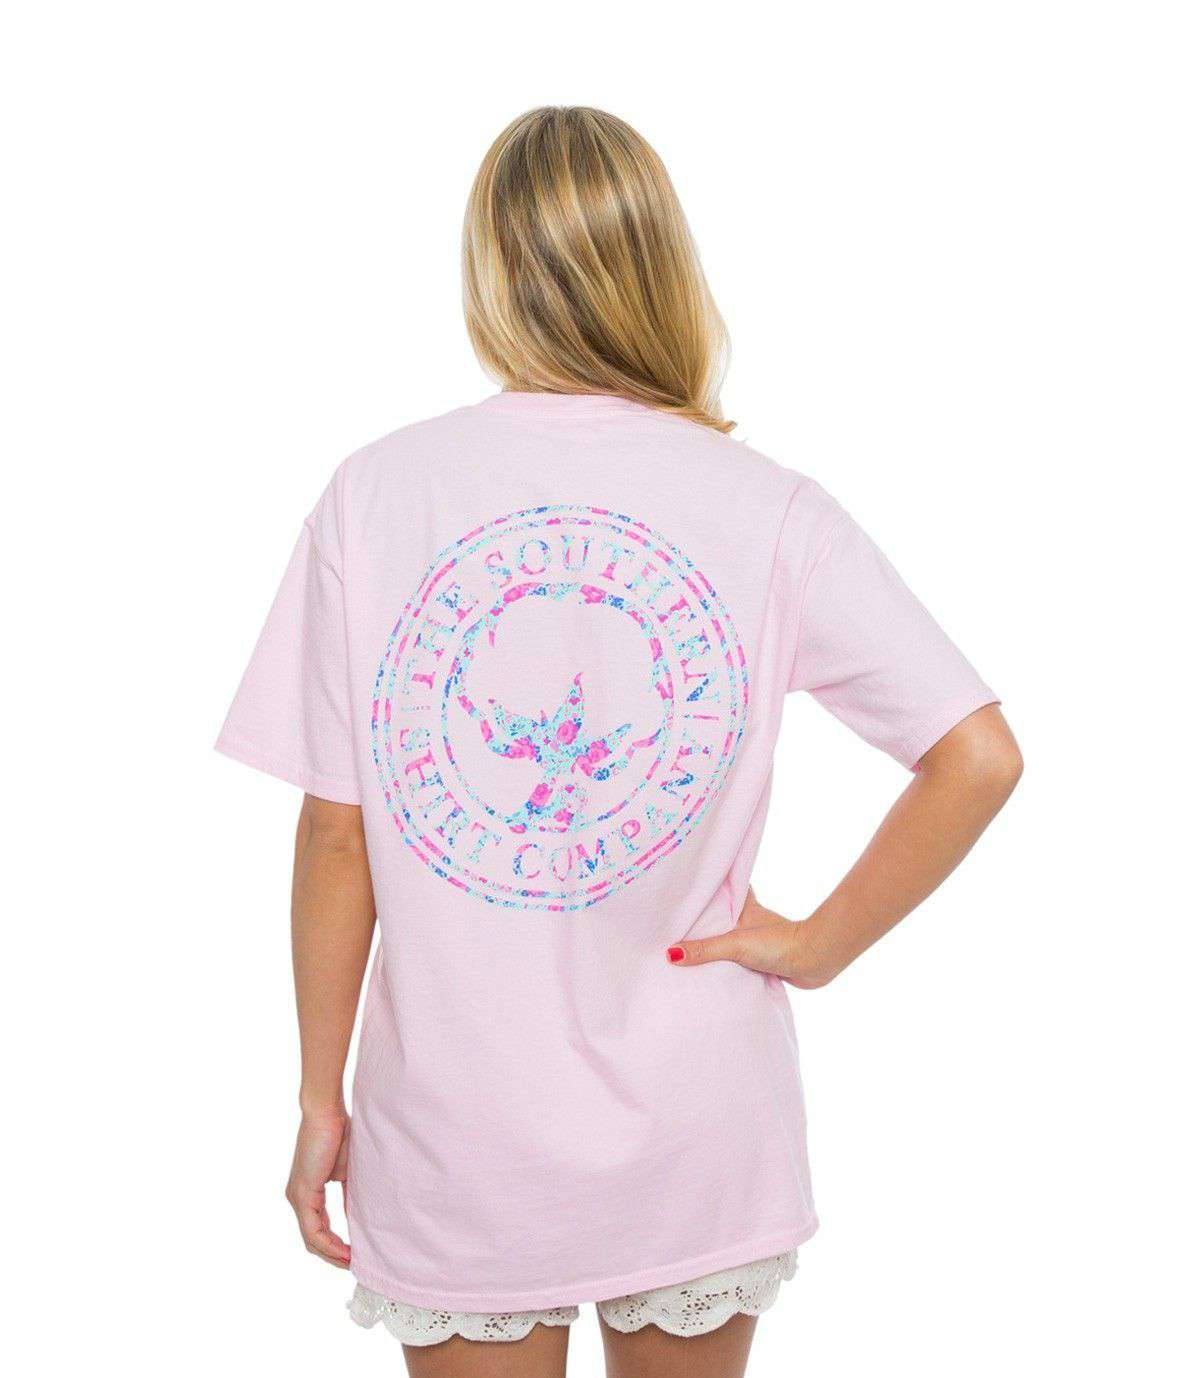 Flower Logo Short Sleeve Tee in Blossom Pink by The Southern Shirt Co. - Country Club Prep